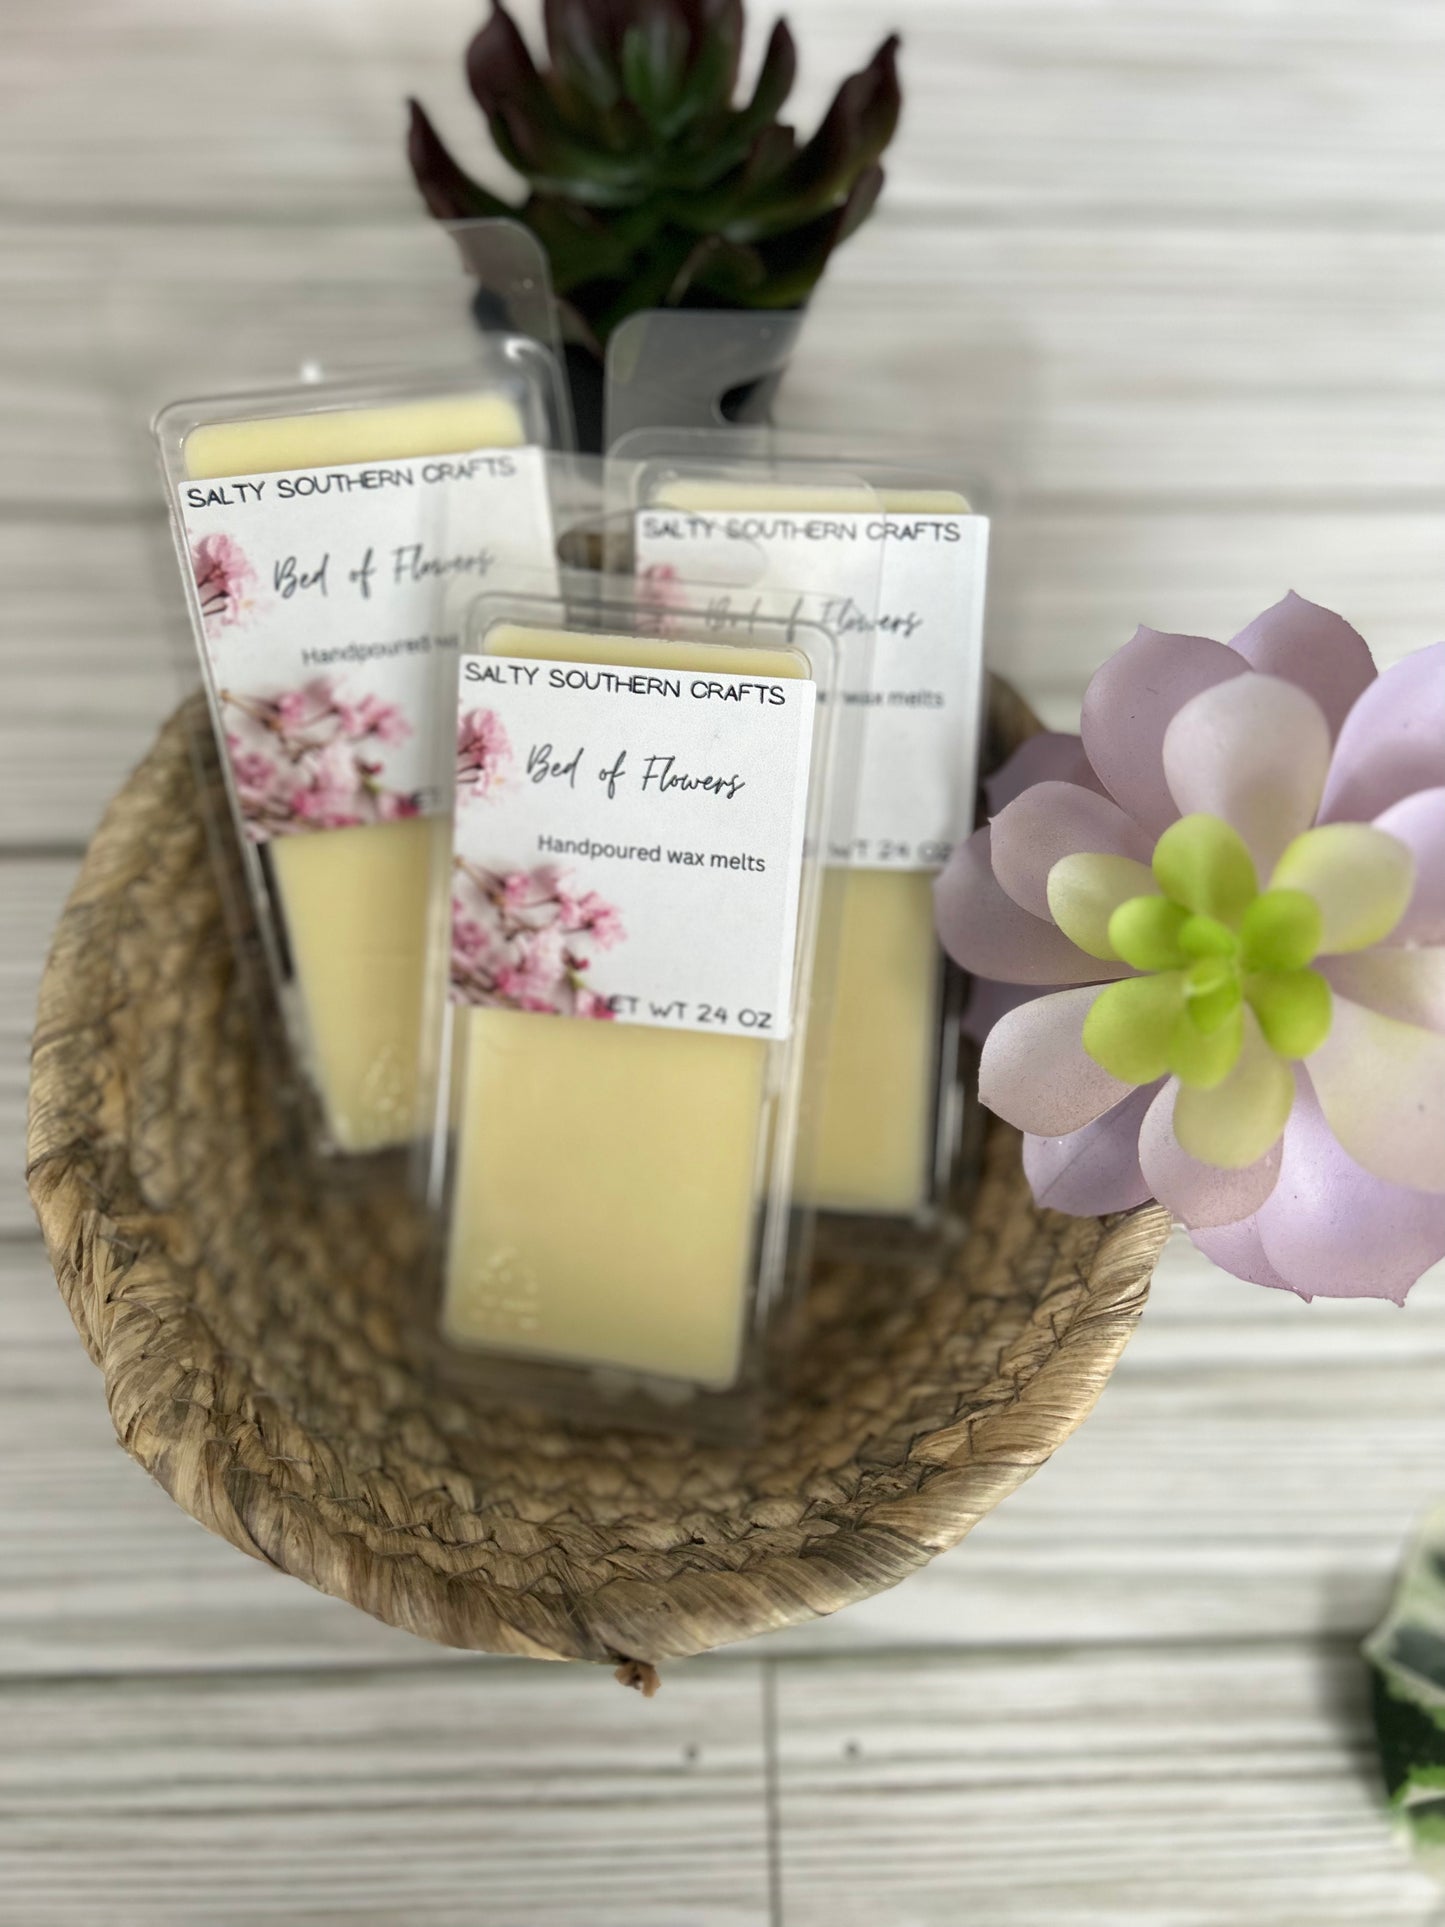 Bed of flowers soy wax melt 10 ct